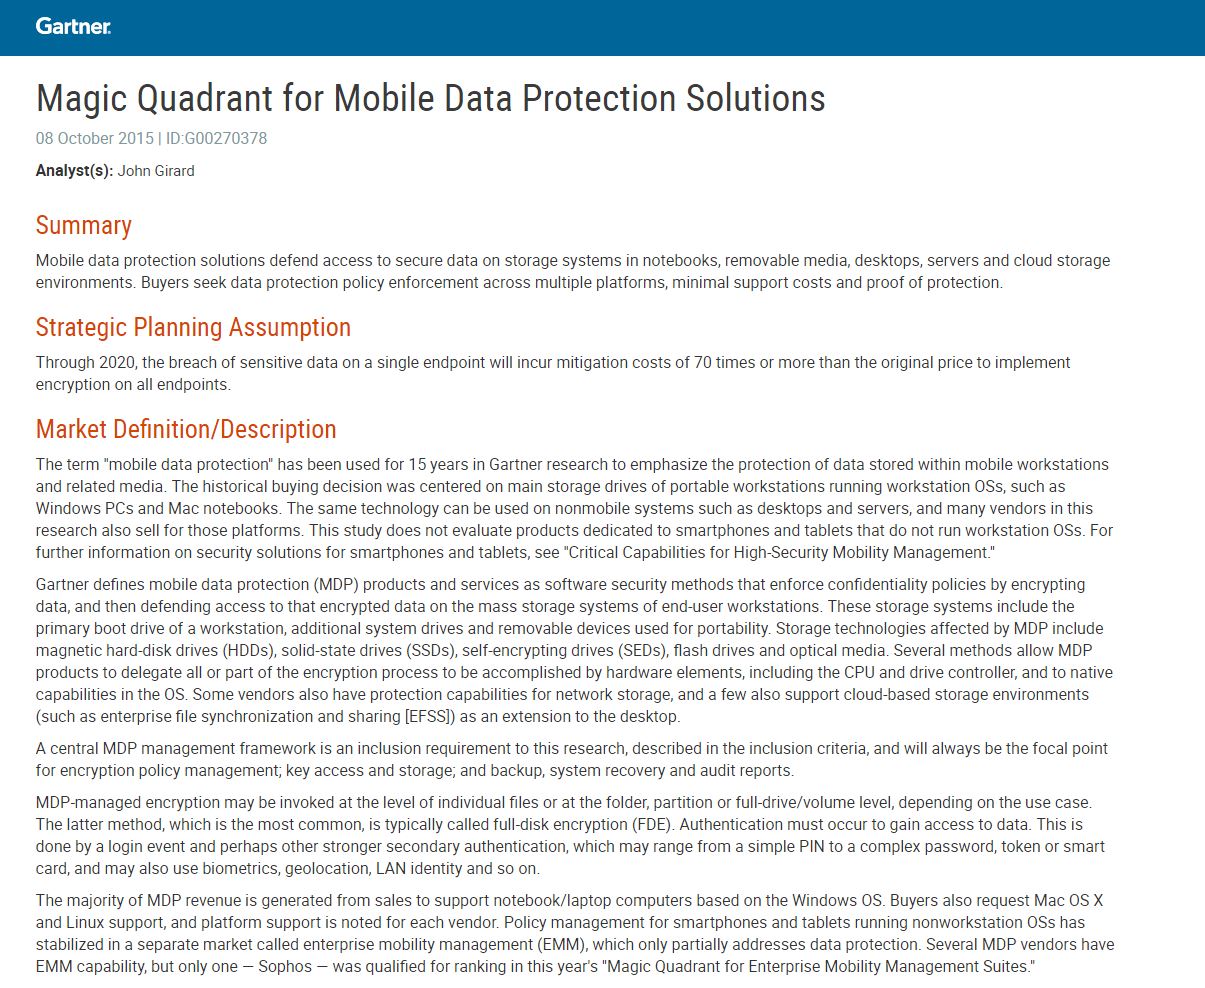 Magic Quadrant for Mobile Data Protection Solutions